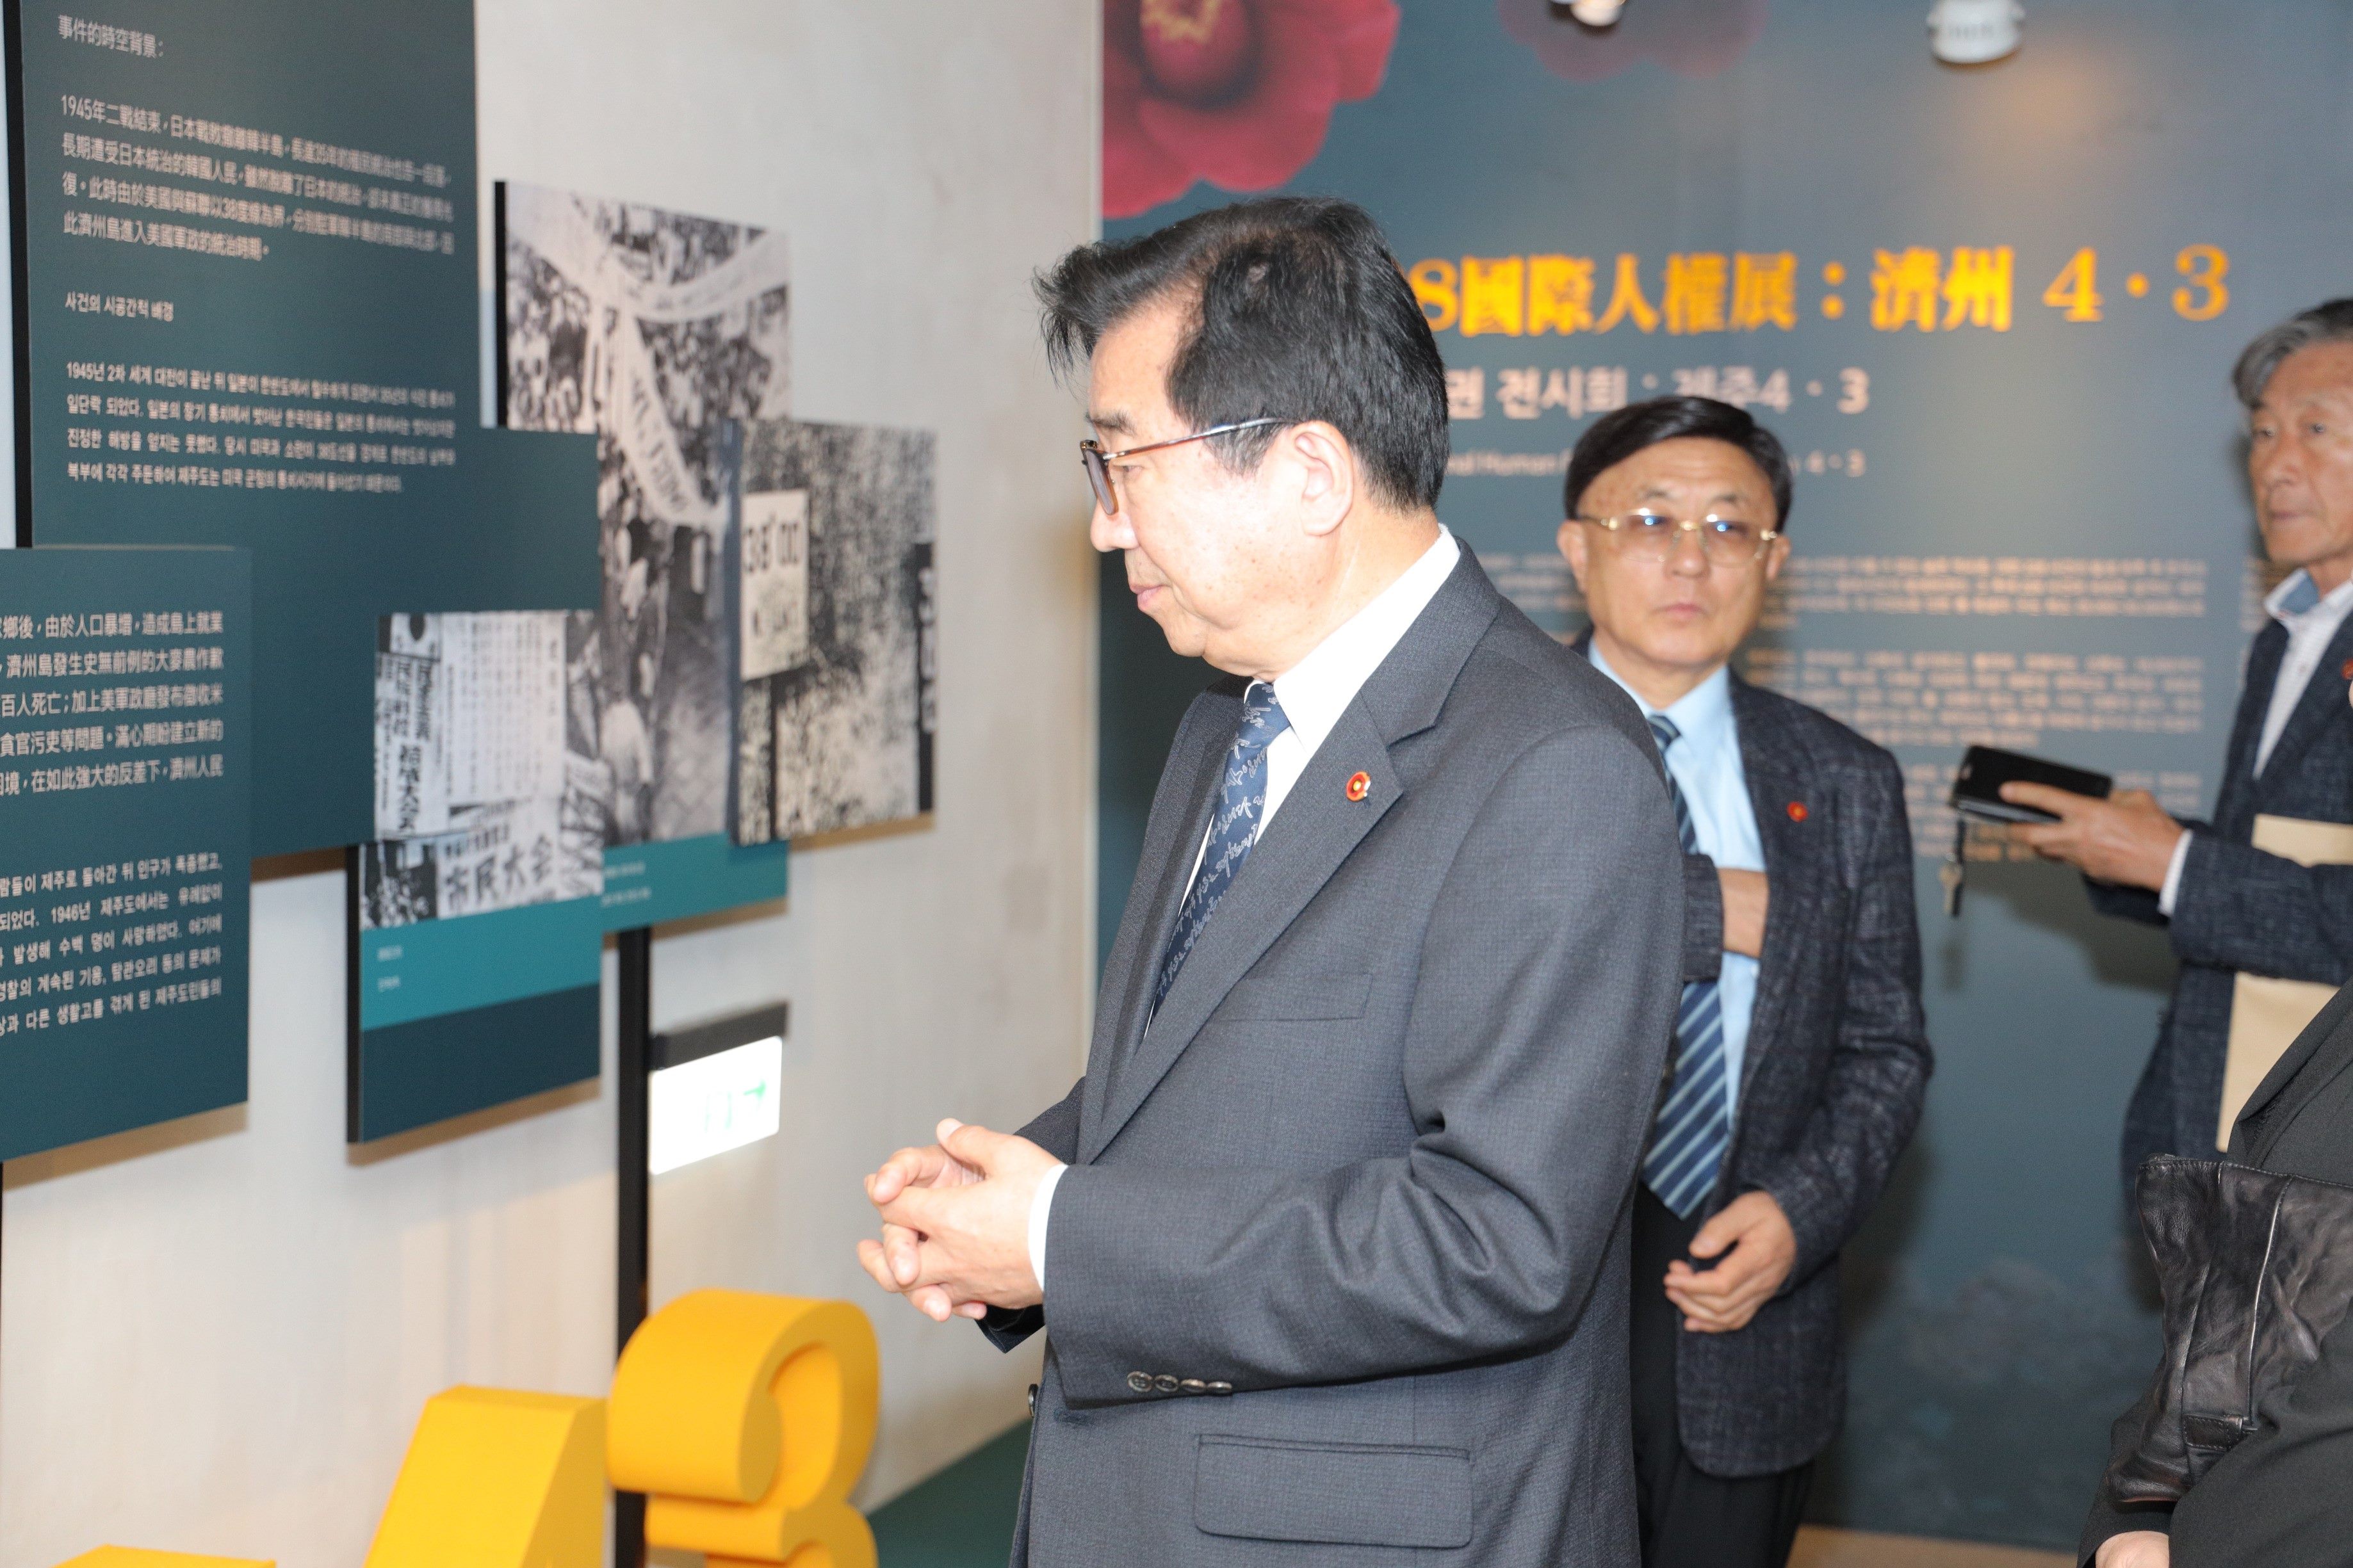 Liang Zuo-xun (梁祚勳), the chairman of Jeju 4.3 Peace Institute, at the exhibition.